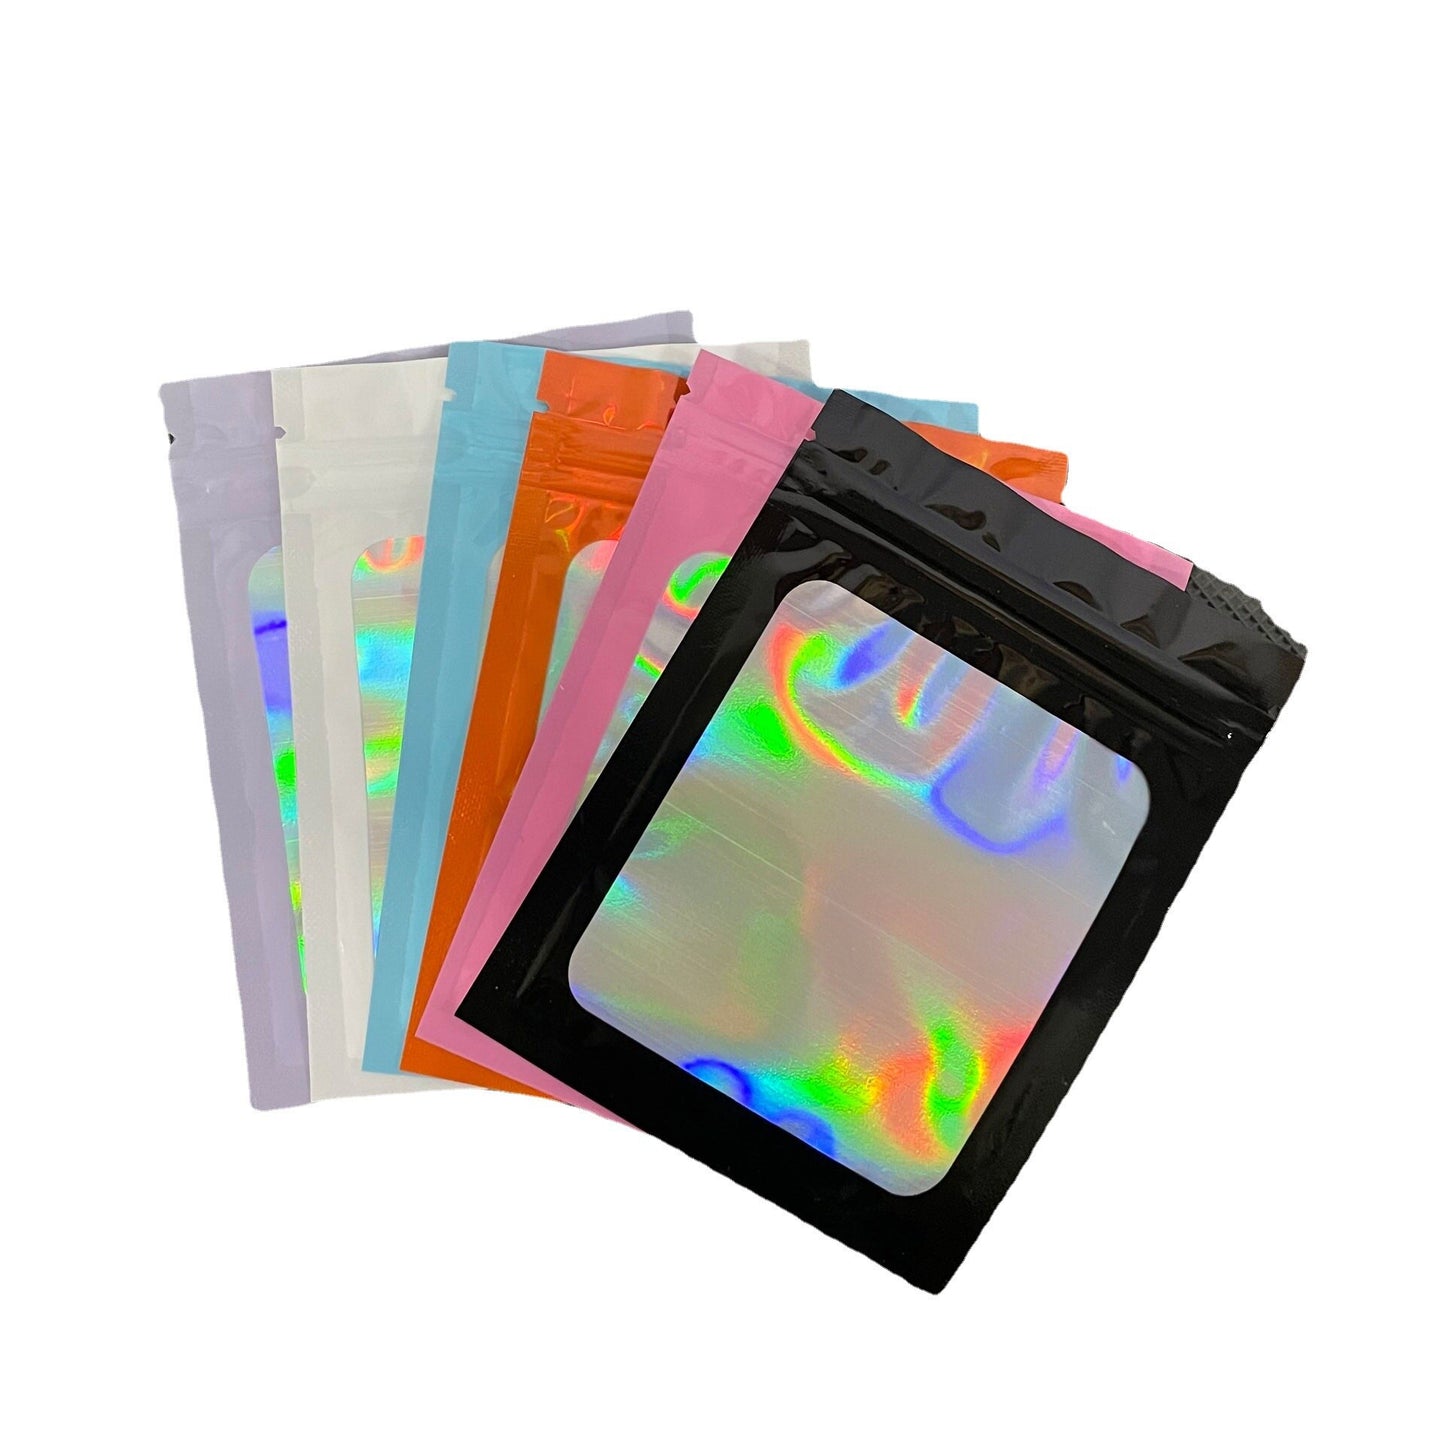 100 Pc Smell Proof Mylar Bags Resealable Odor Proof Bags Holographic Packaging Pouch Bag With Clear Window For Food